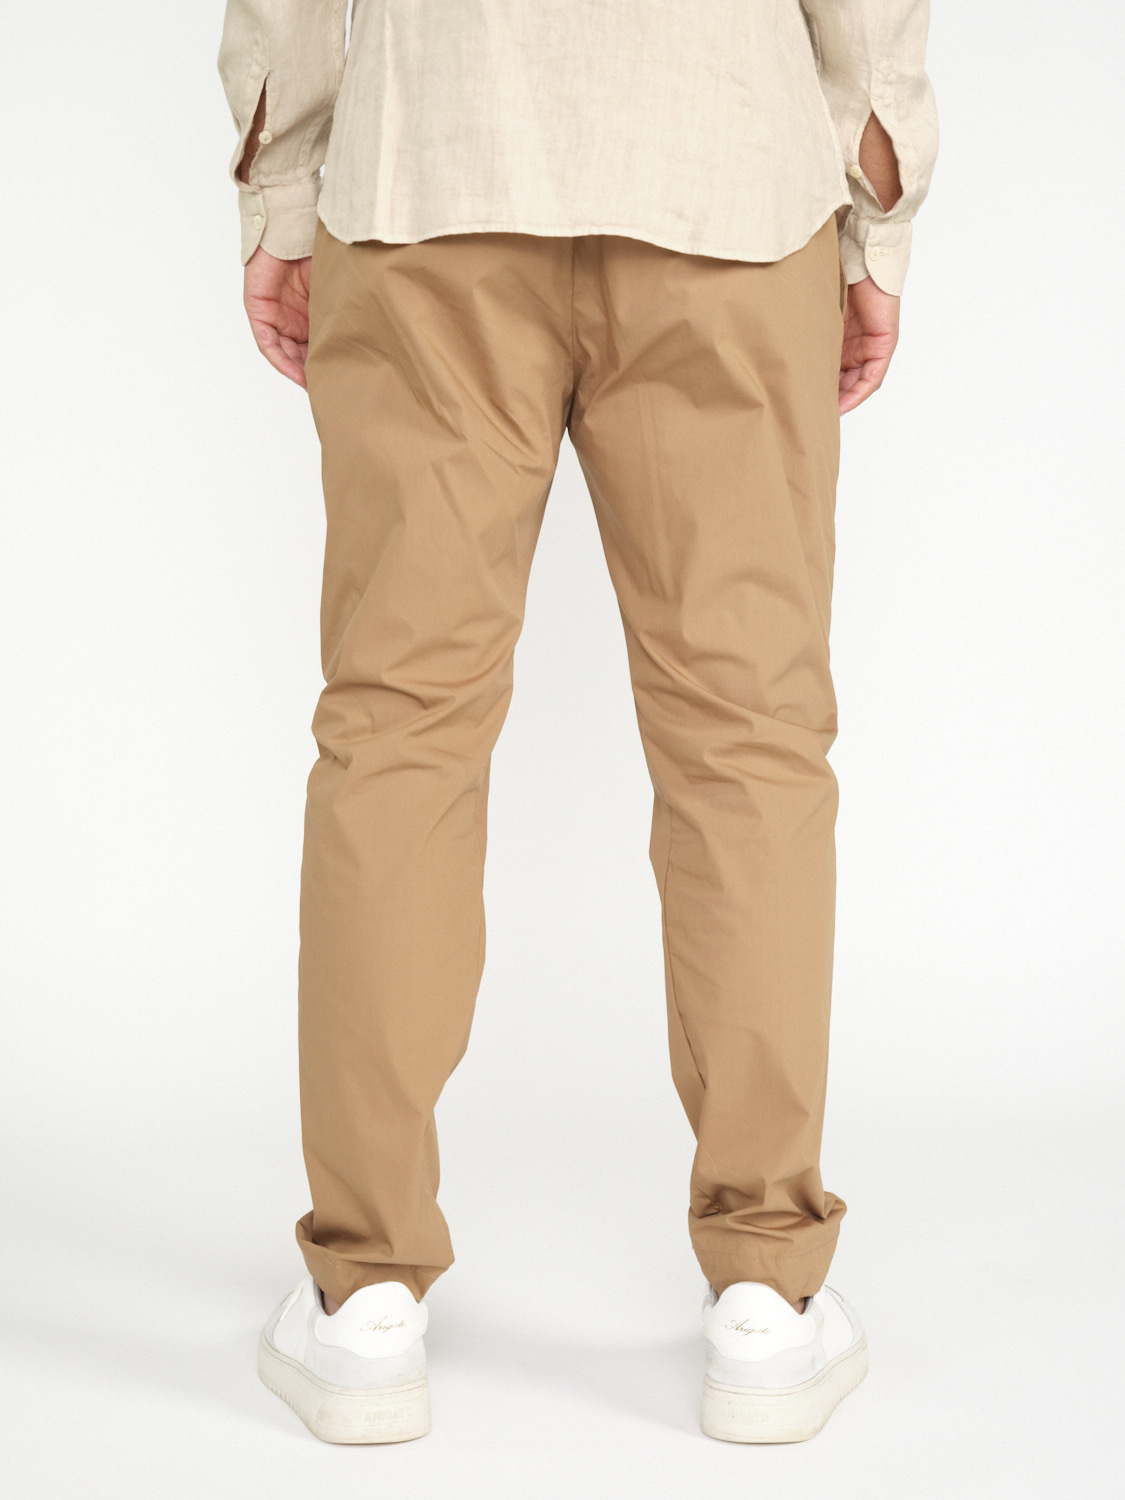 nine in the morning Yoga – cotton blend trousers in chino style  camel 50